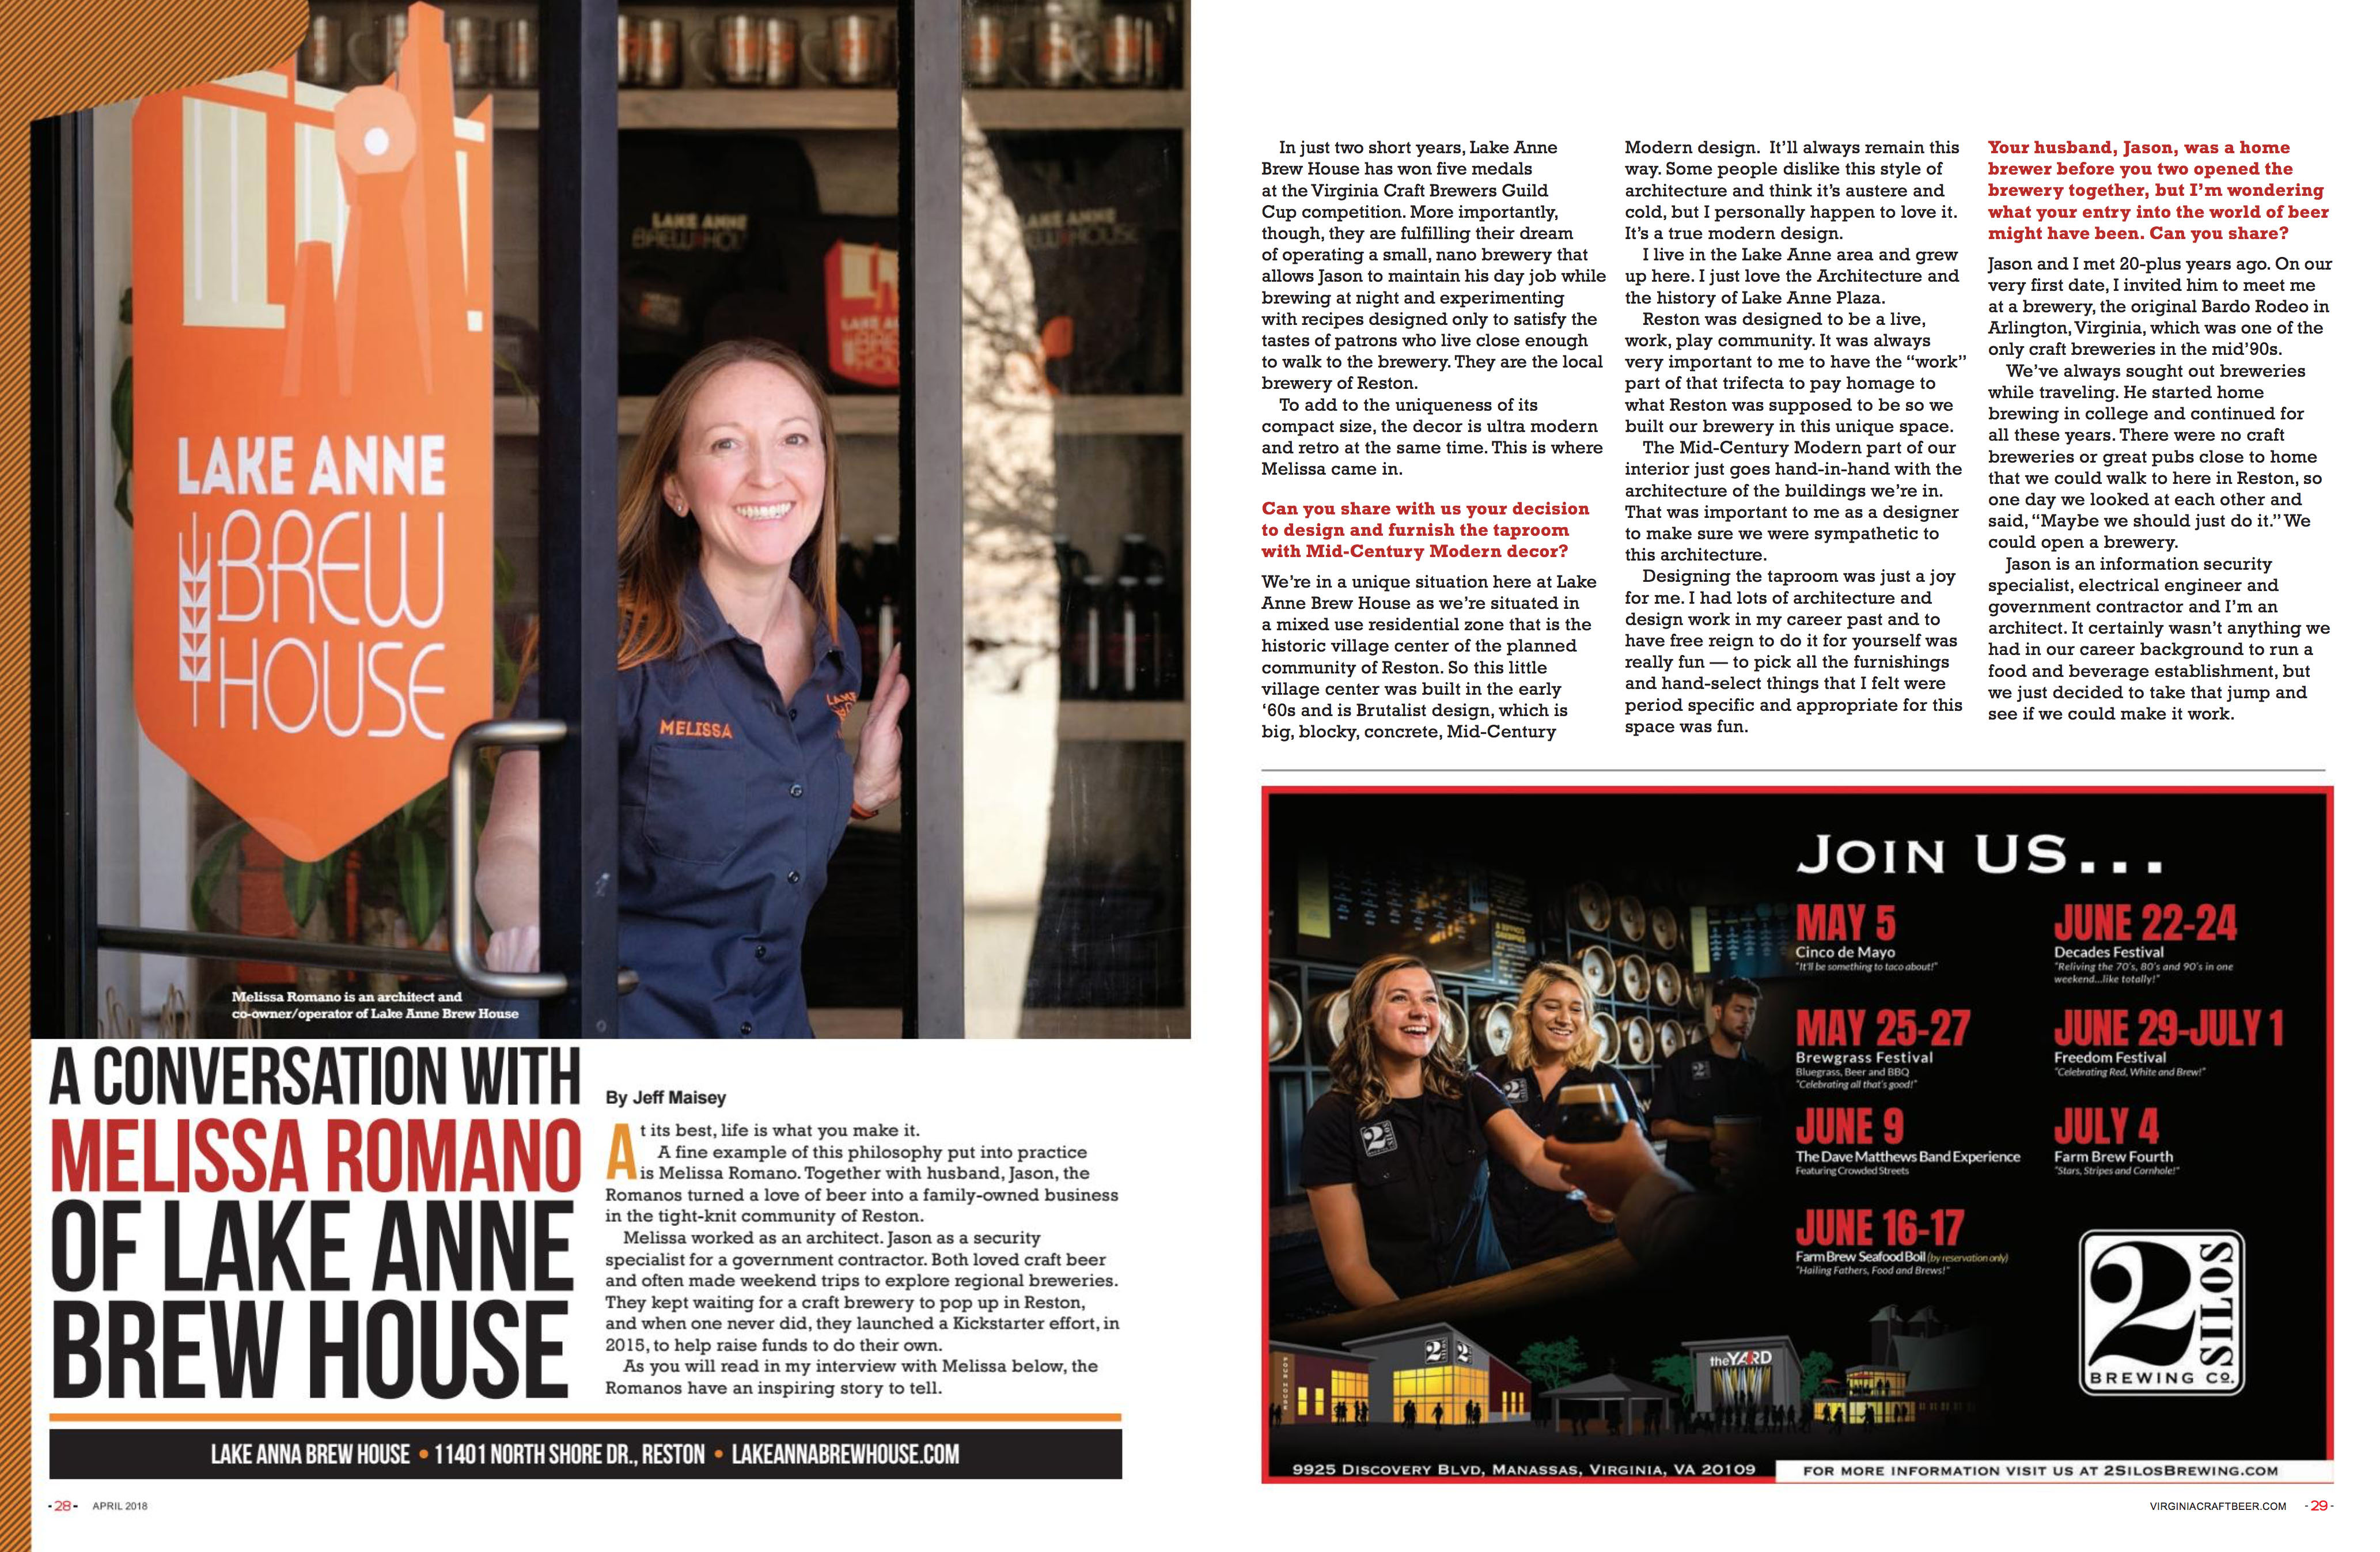 Article about the Lake Anne Brew House in the April/May 2018 issue of Virginia Craft Beer